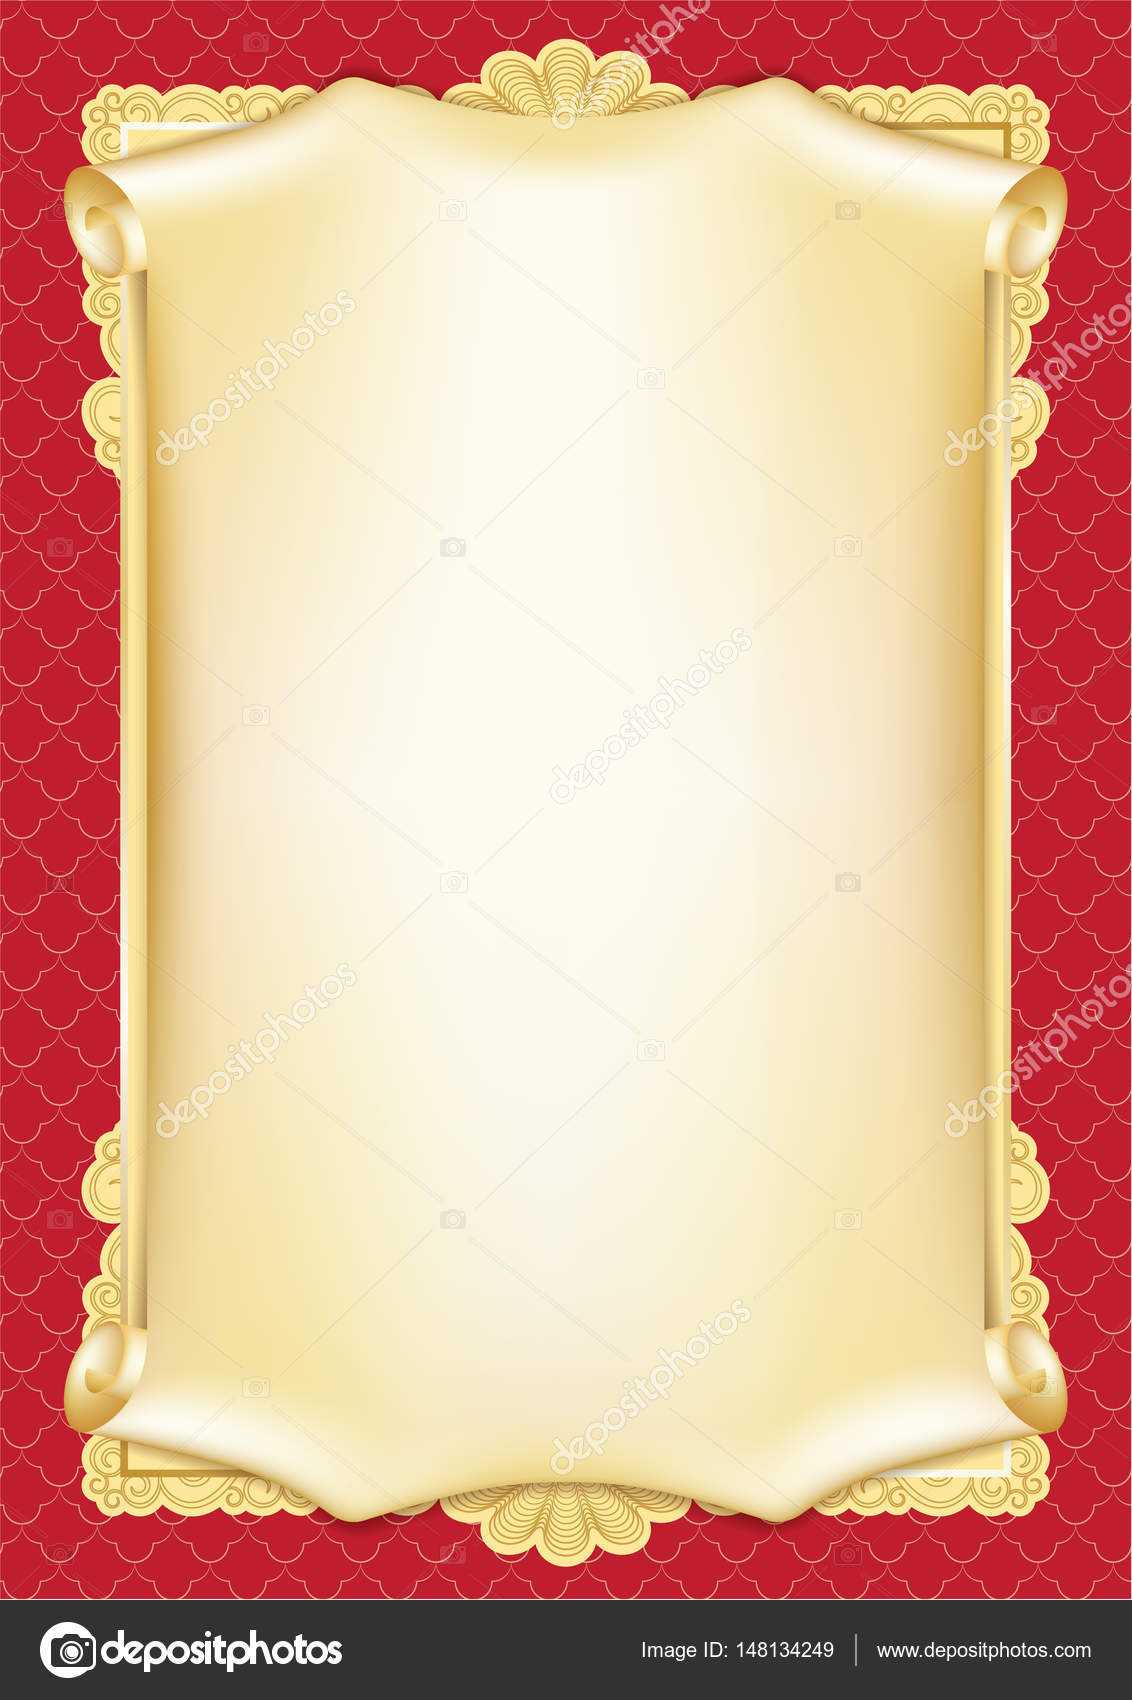 Template For Diploma, Certificate, Card With Scroll And Intended For Scroll Certificate Templates